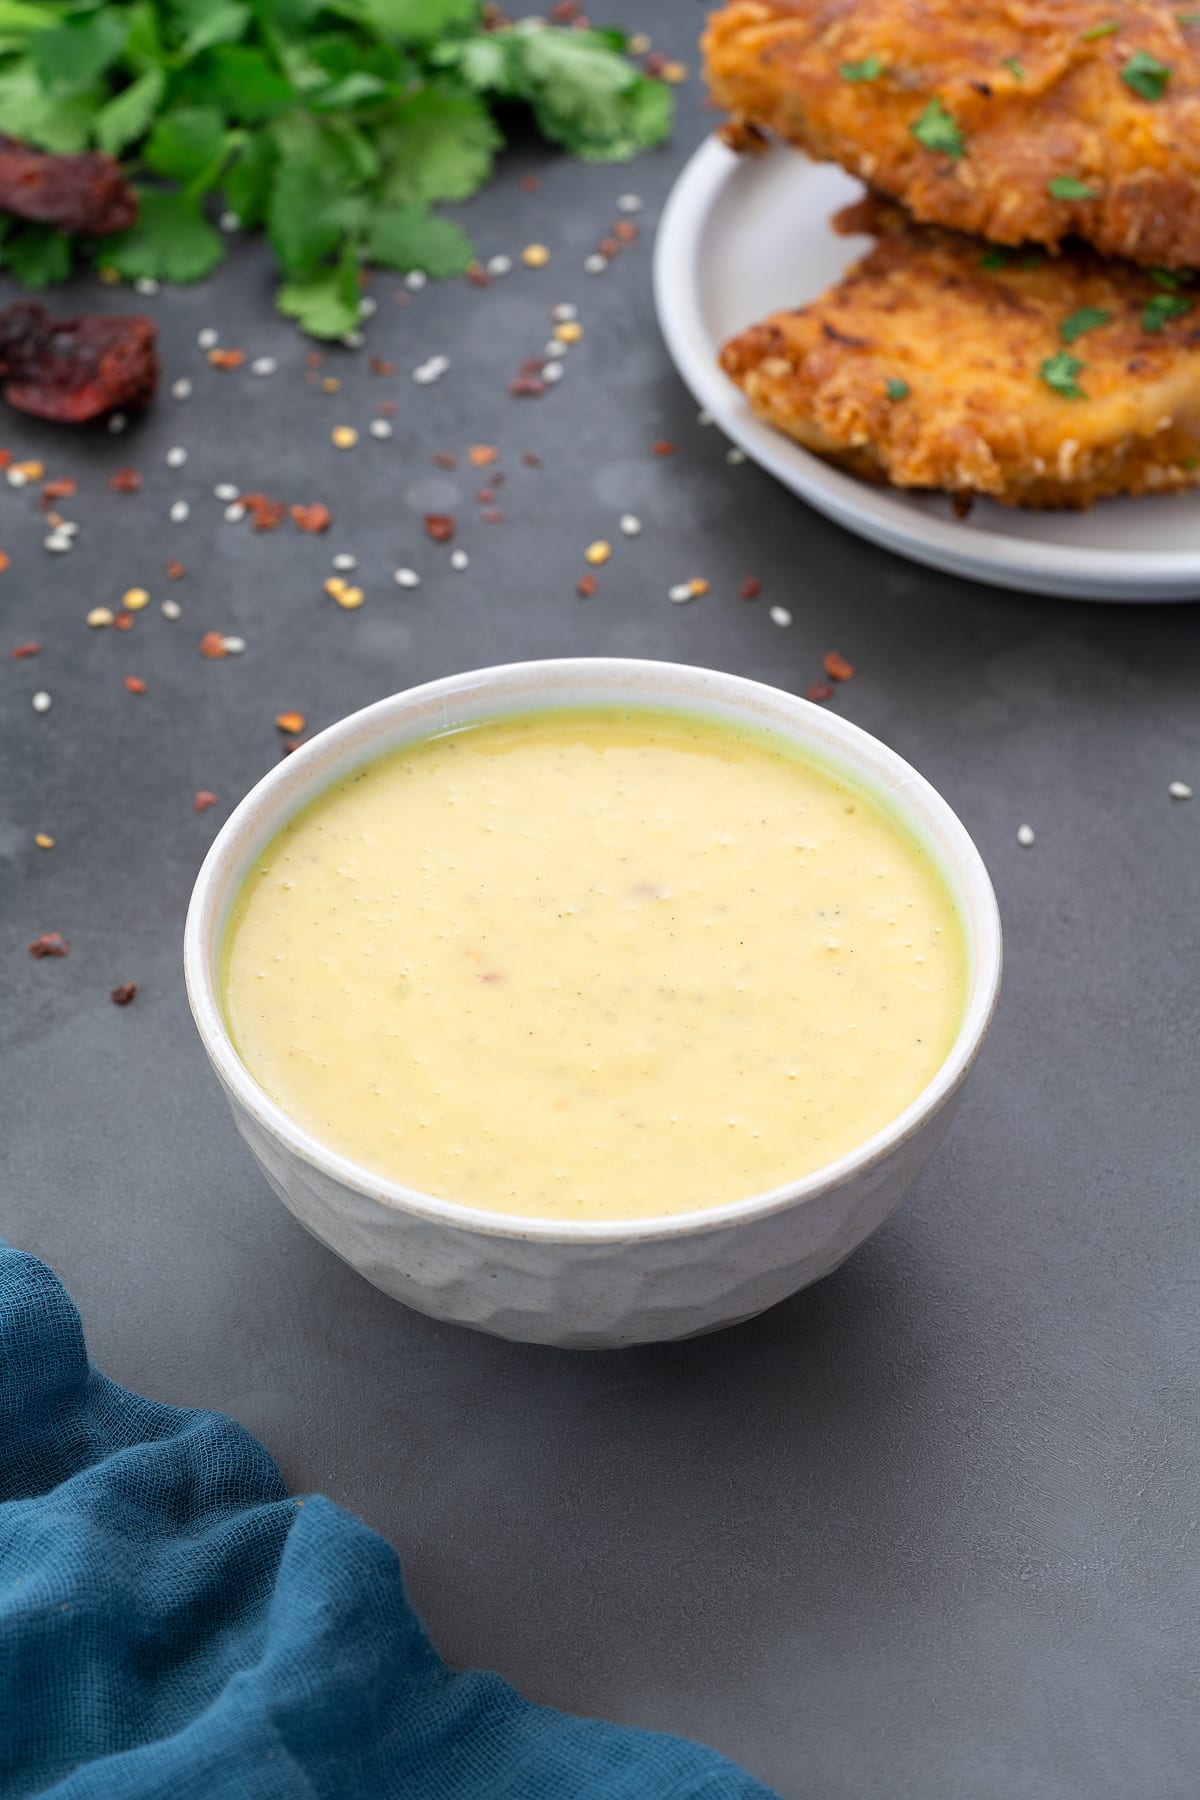 Homemade Honey Mustard Sauce in a white bowl with few ingredients scattered around.